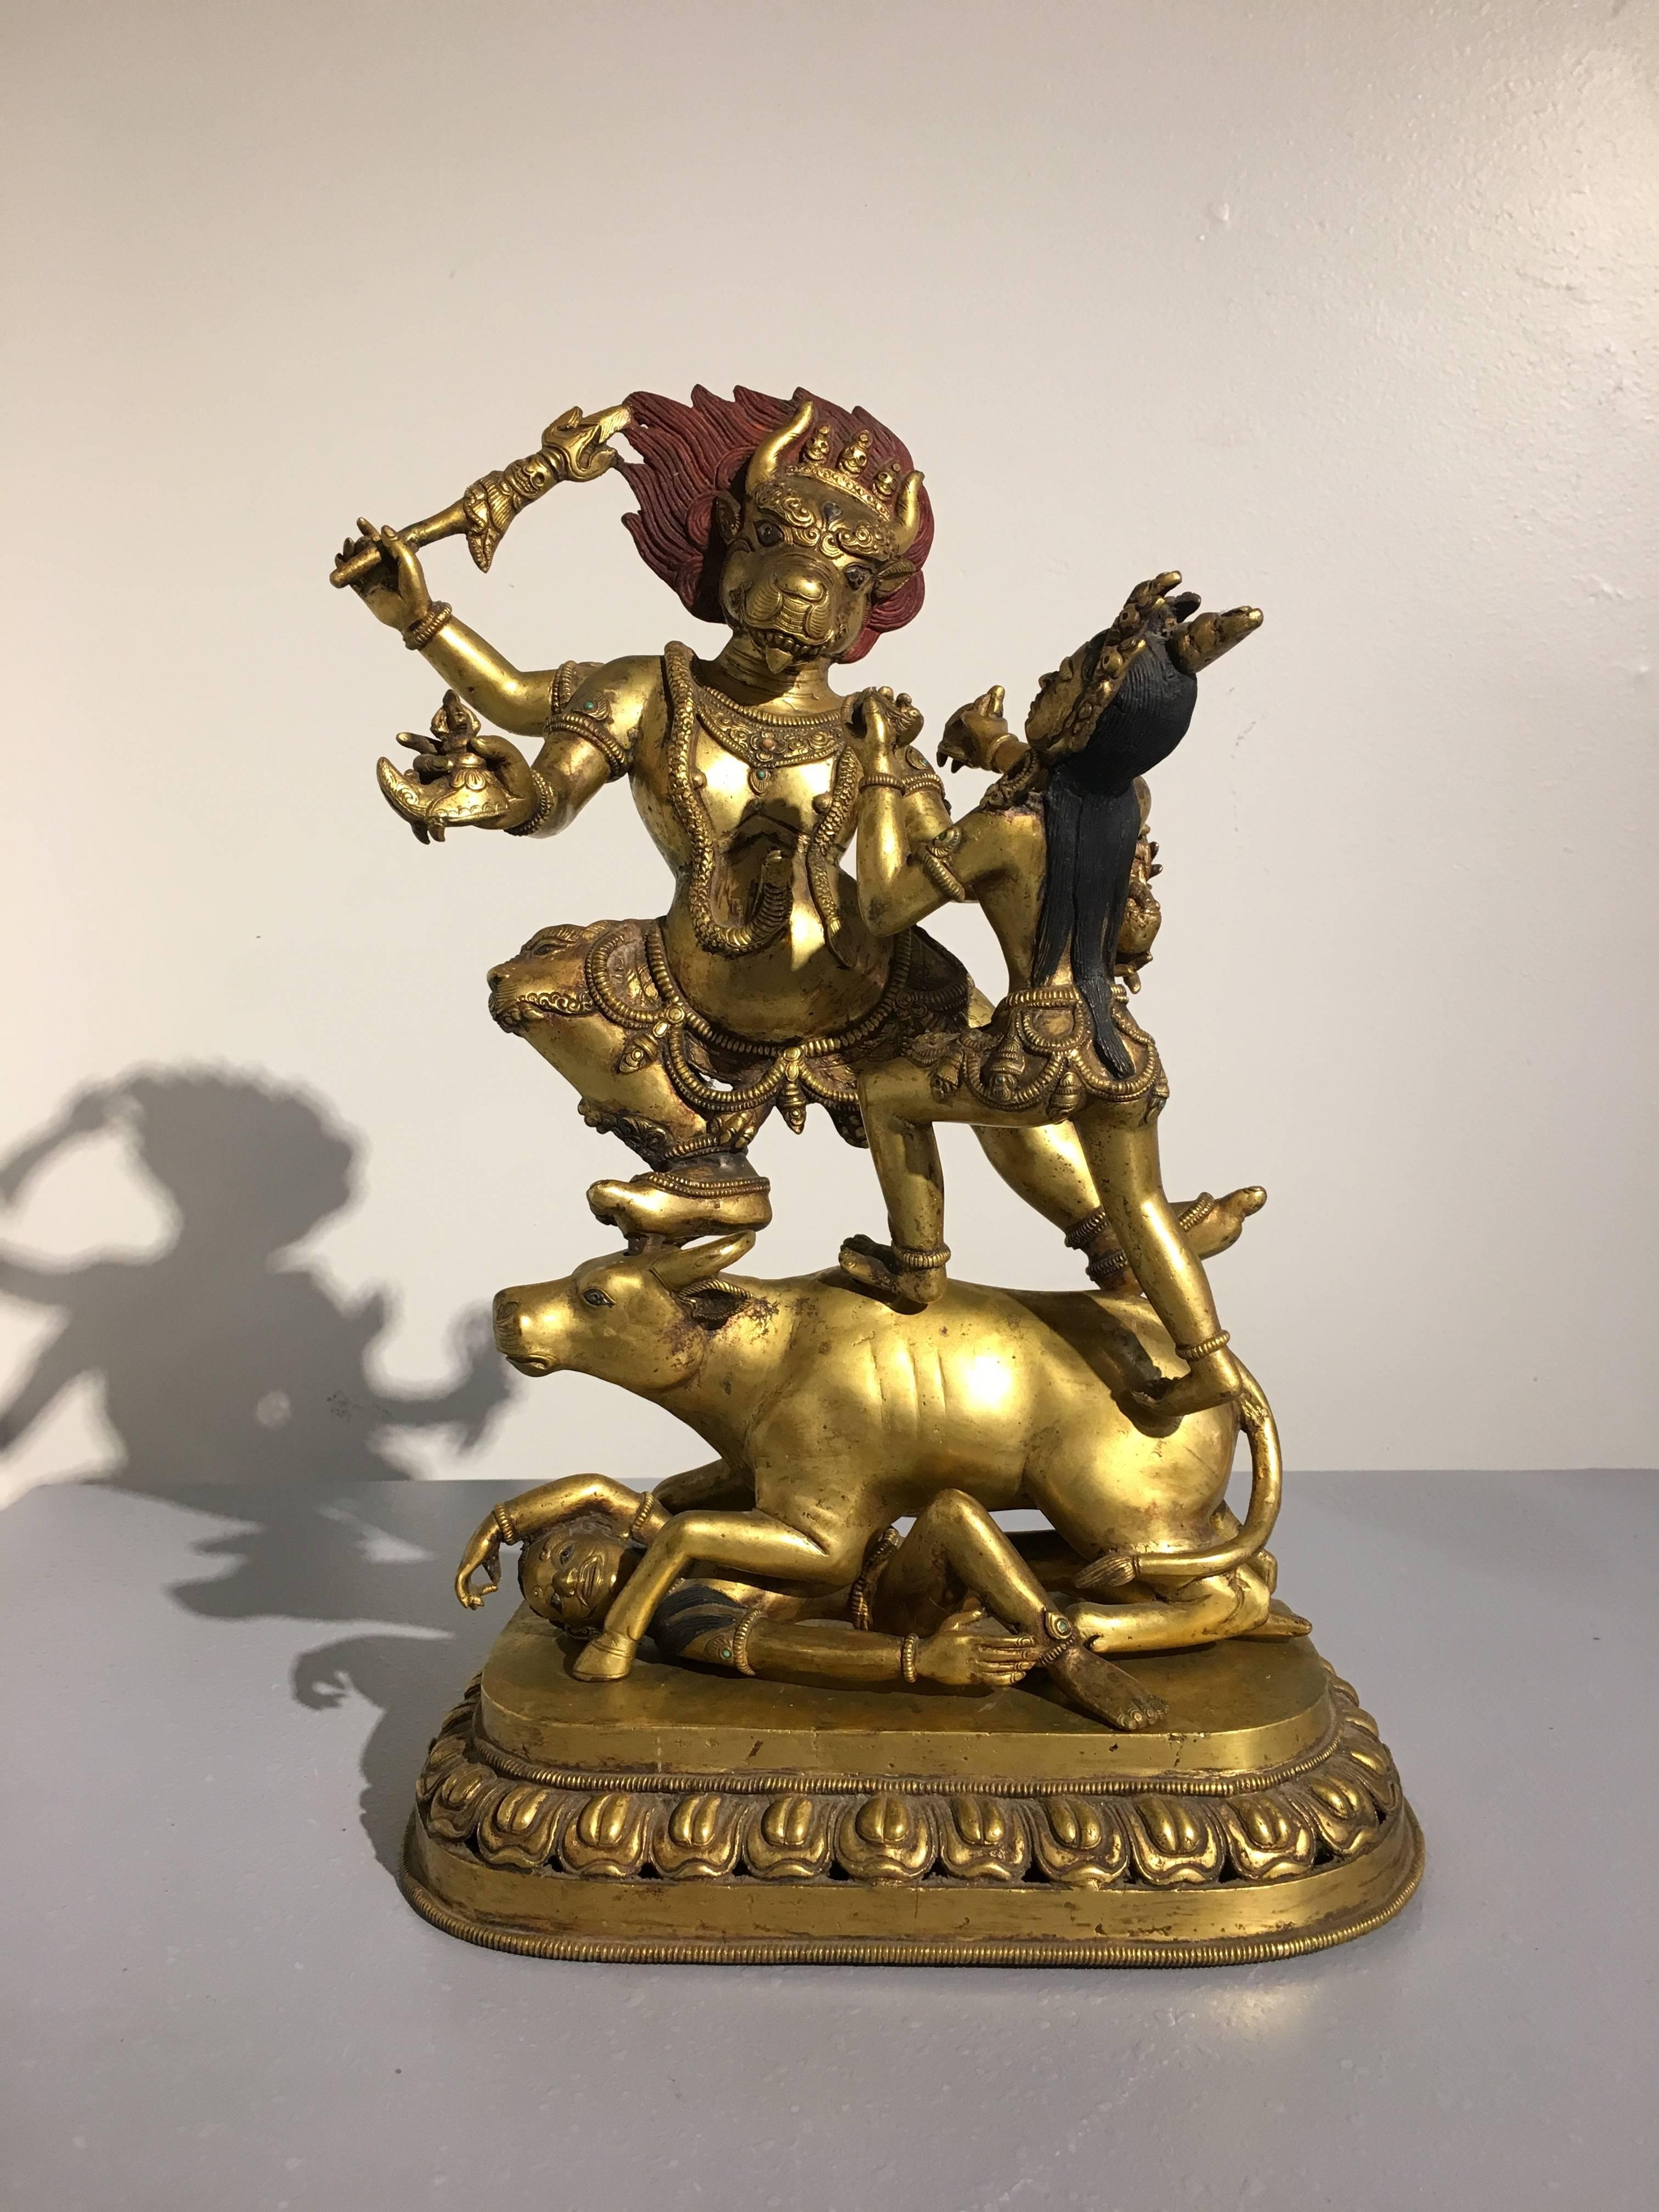 A large and impressive Nepalese tantric gilt bronze figure of the dikpala Yama and his sister, Yami, early to mid-20th century (1920s-1940s). 
Well cast and richly gilt, the buffalo headed dikpala (directional guardian) of the South stands upon the